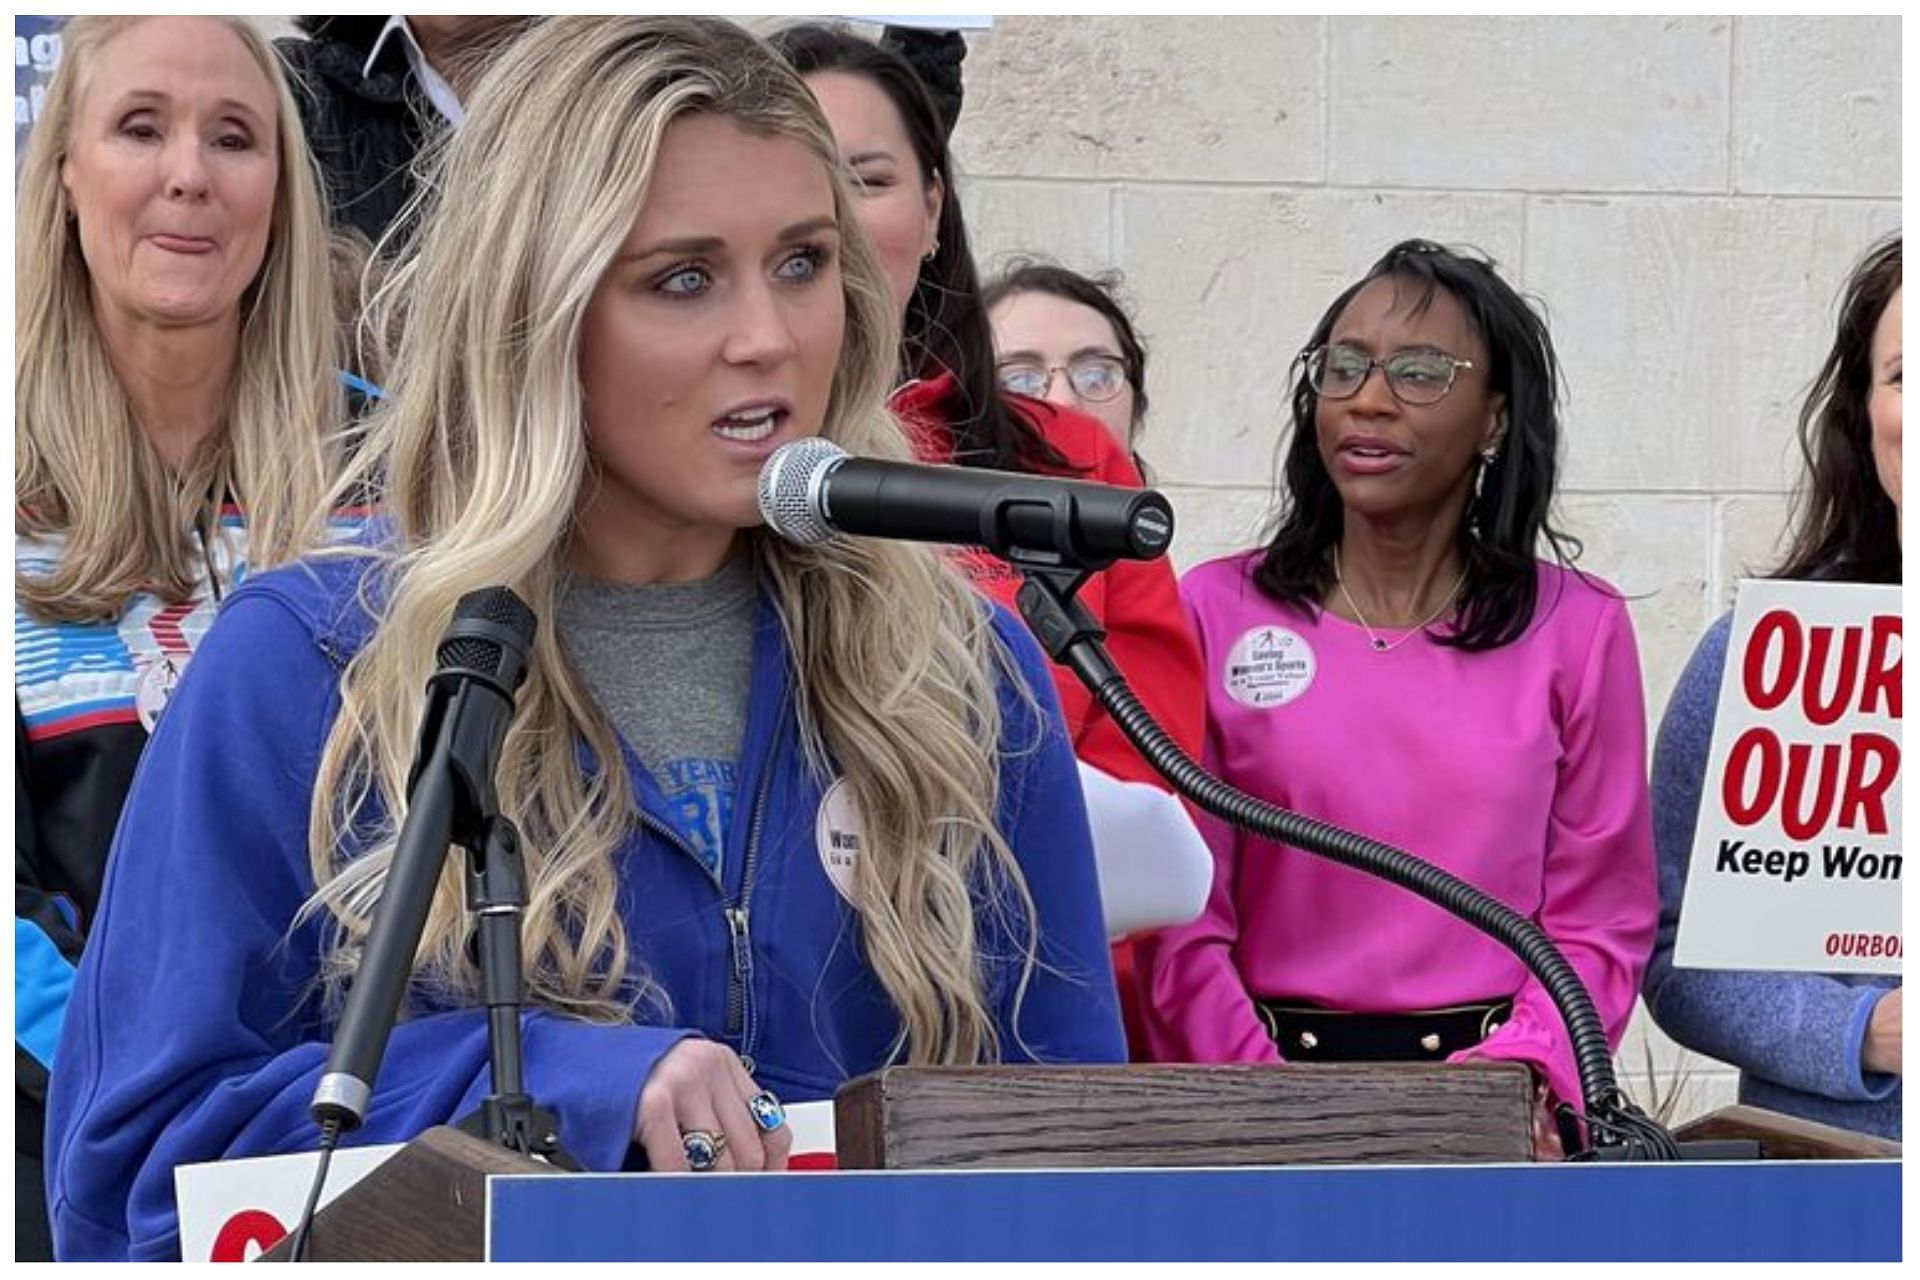 Former University of Kentucky All-American swimmer Riley Gaines urged the NCAA to protect single-sex sports for women at a rally outside the NCAA annual convention in San Antonio on Jan. 12, 2023 (Image via the Independent Women